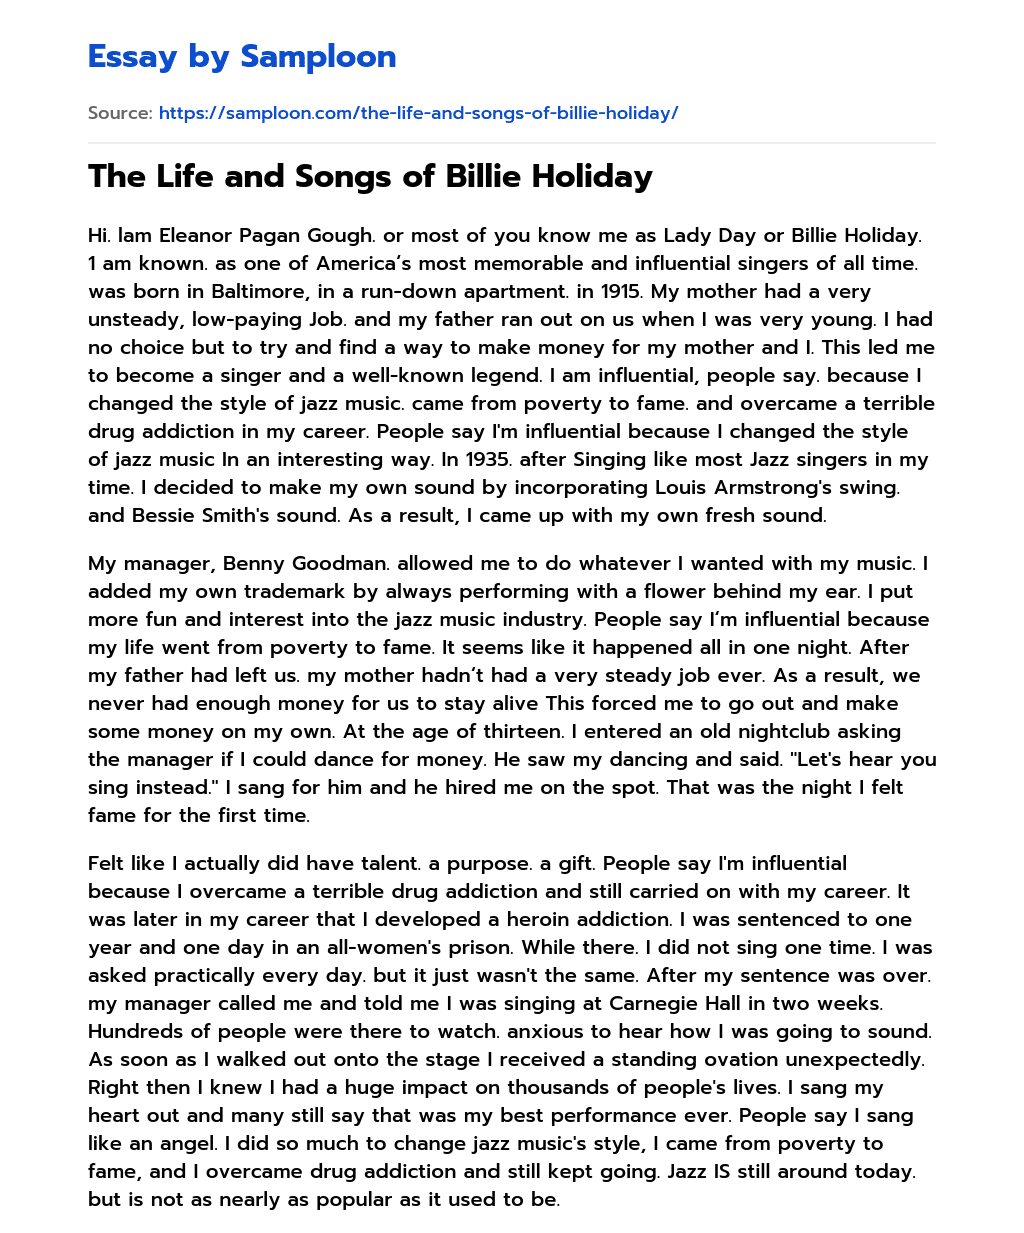 The Life and Songs of Billie Holiday essay